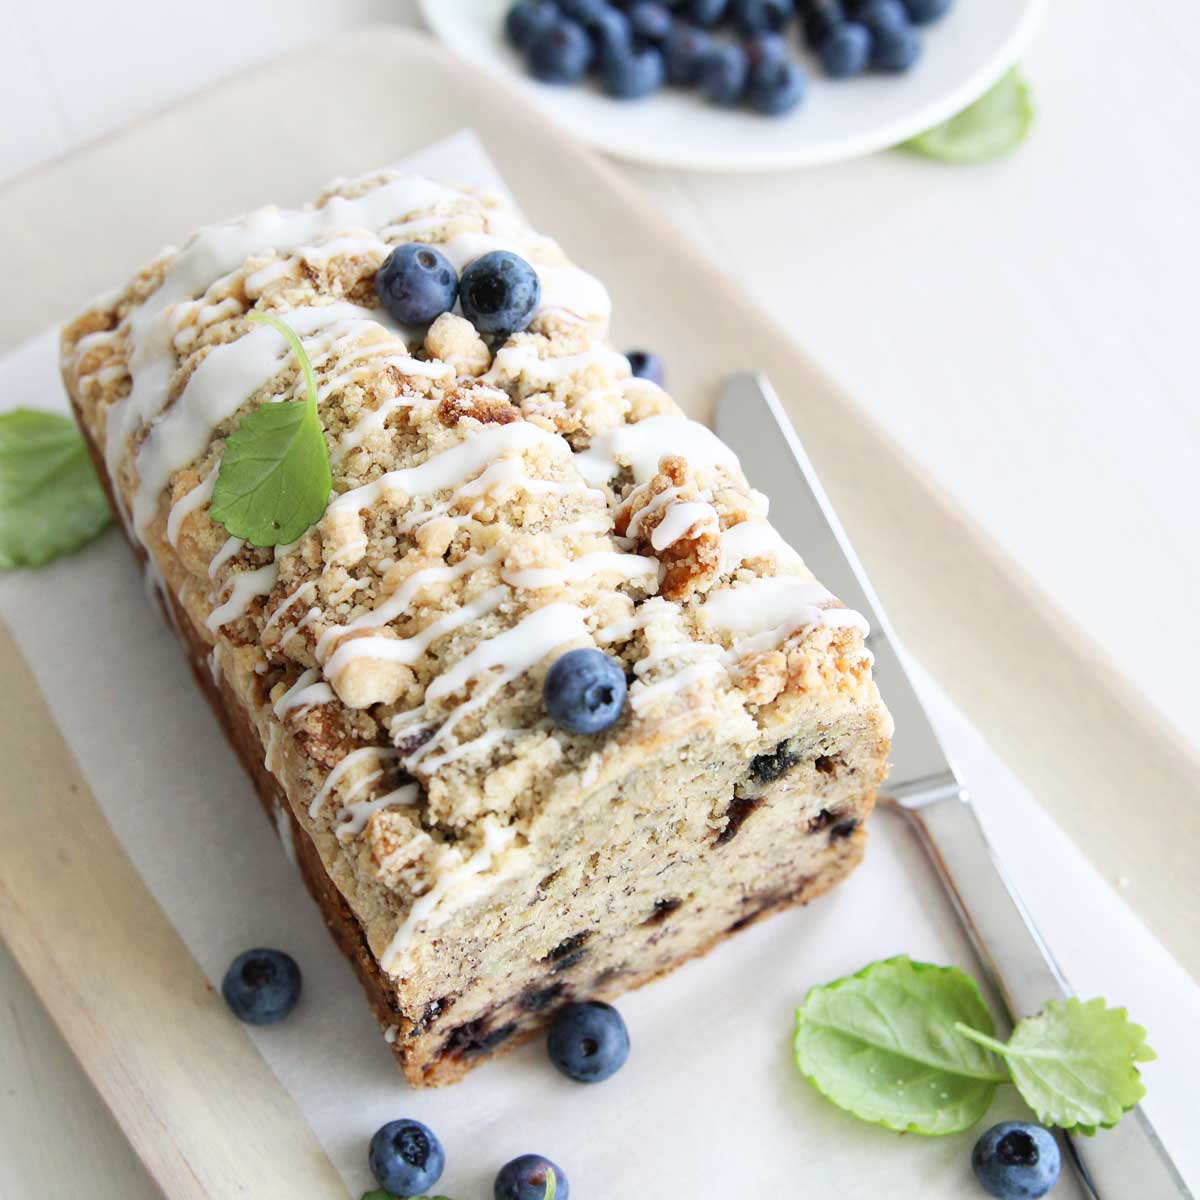 Blueberry Banana Bread with Oats & Streusel (Eggless, Dairy Free) - Lemon Whipped Cream